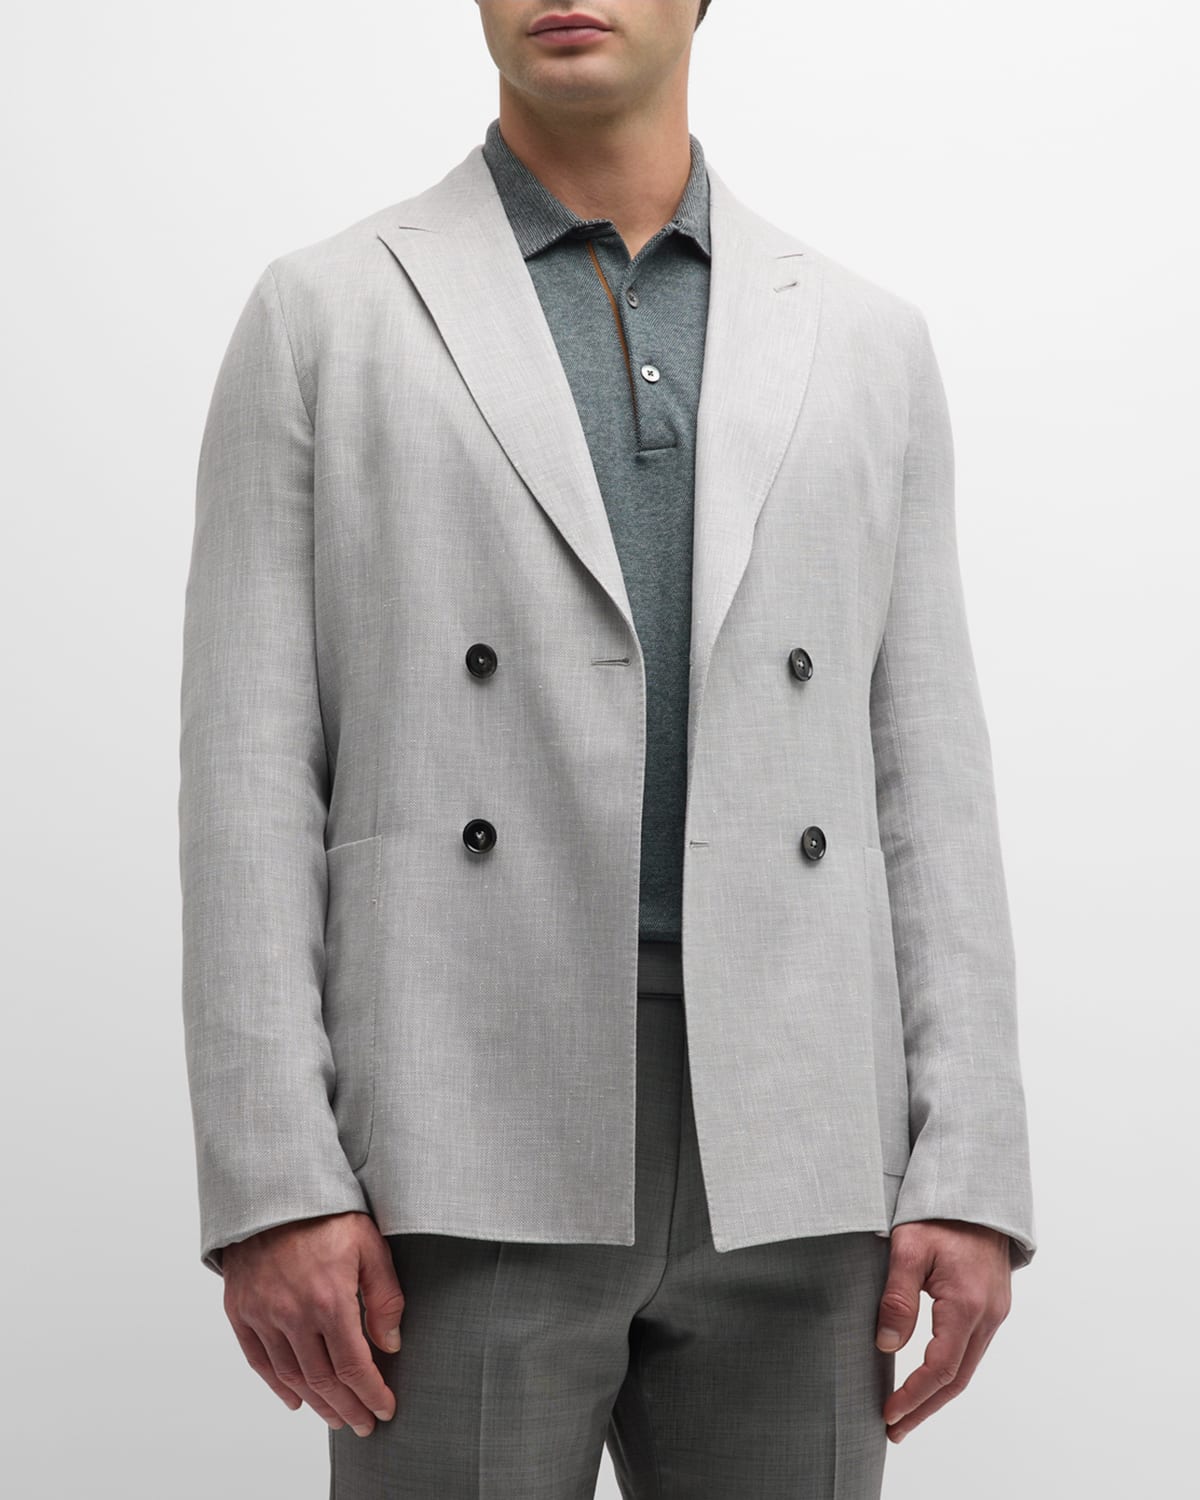 Zegna Men's Crossover Double-breasted Blazer In Light Gray